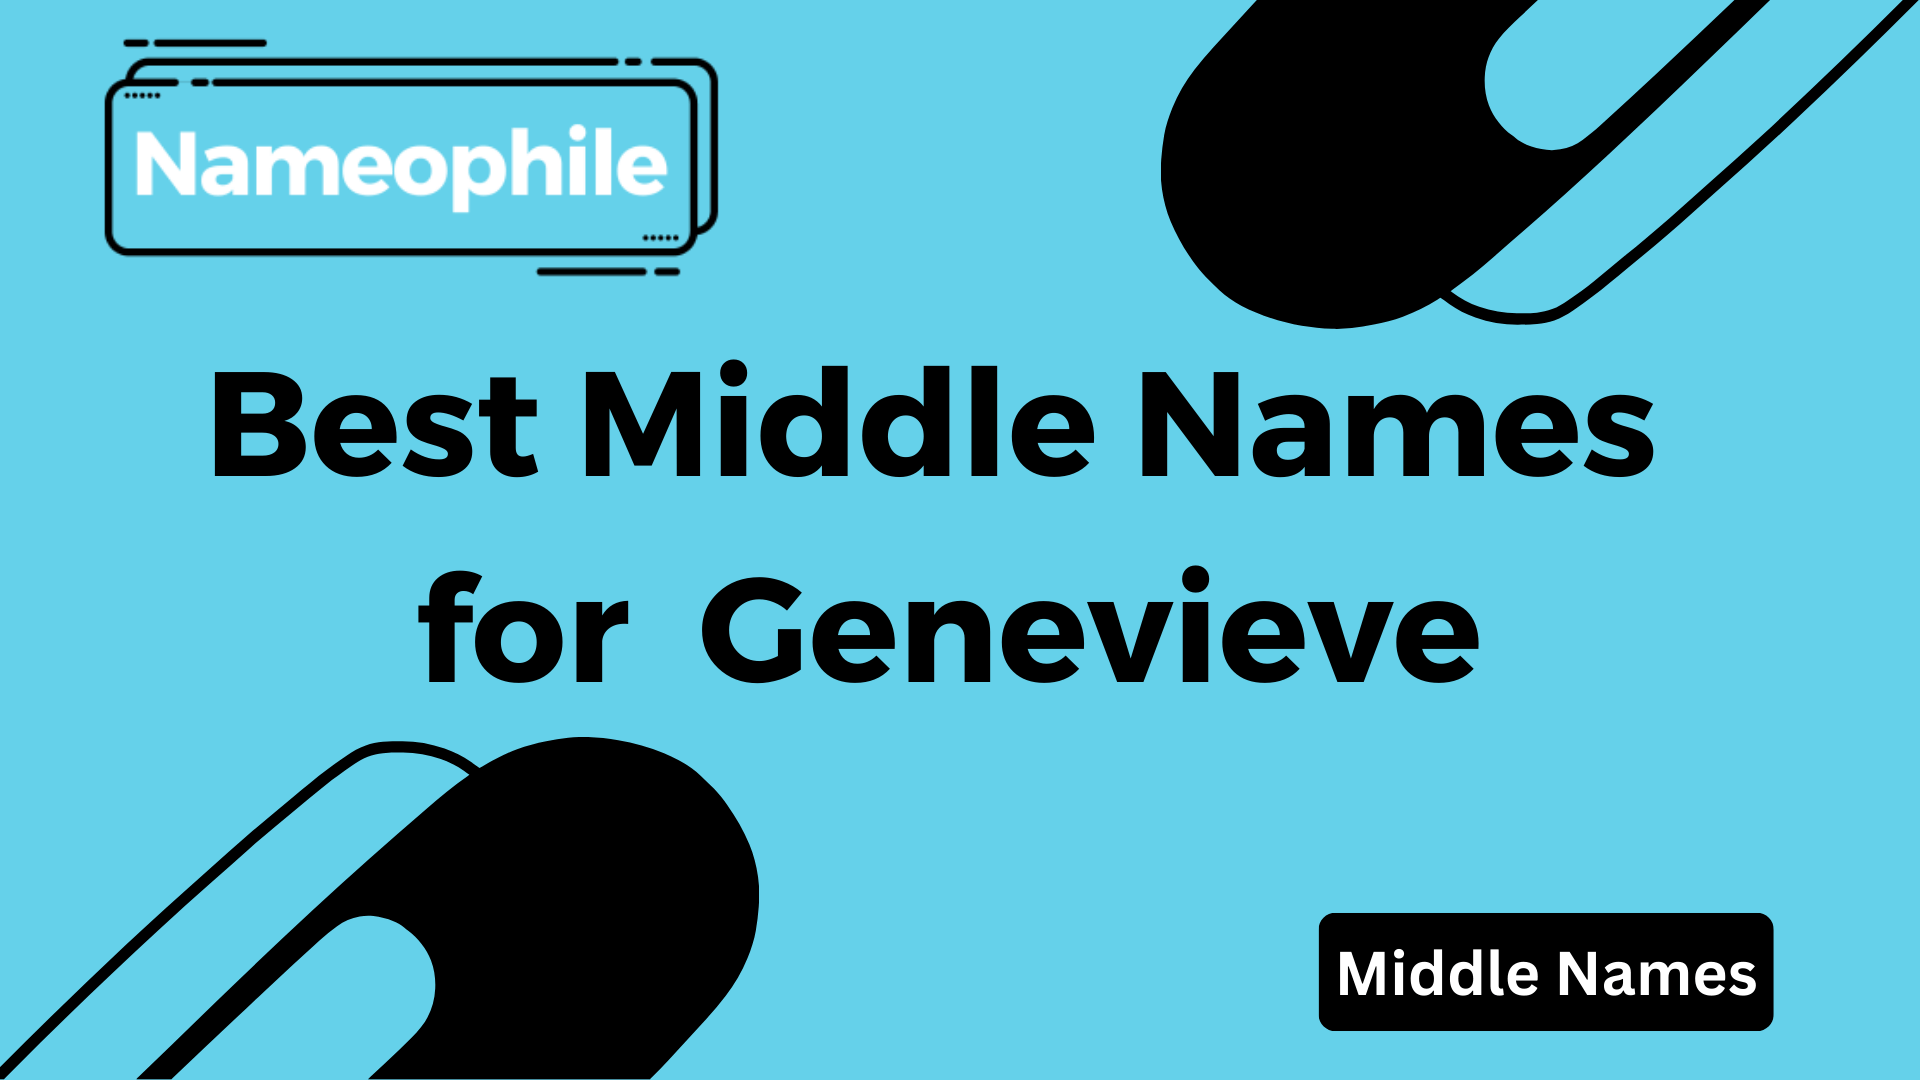 Best Middle Names for Genevieve